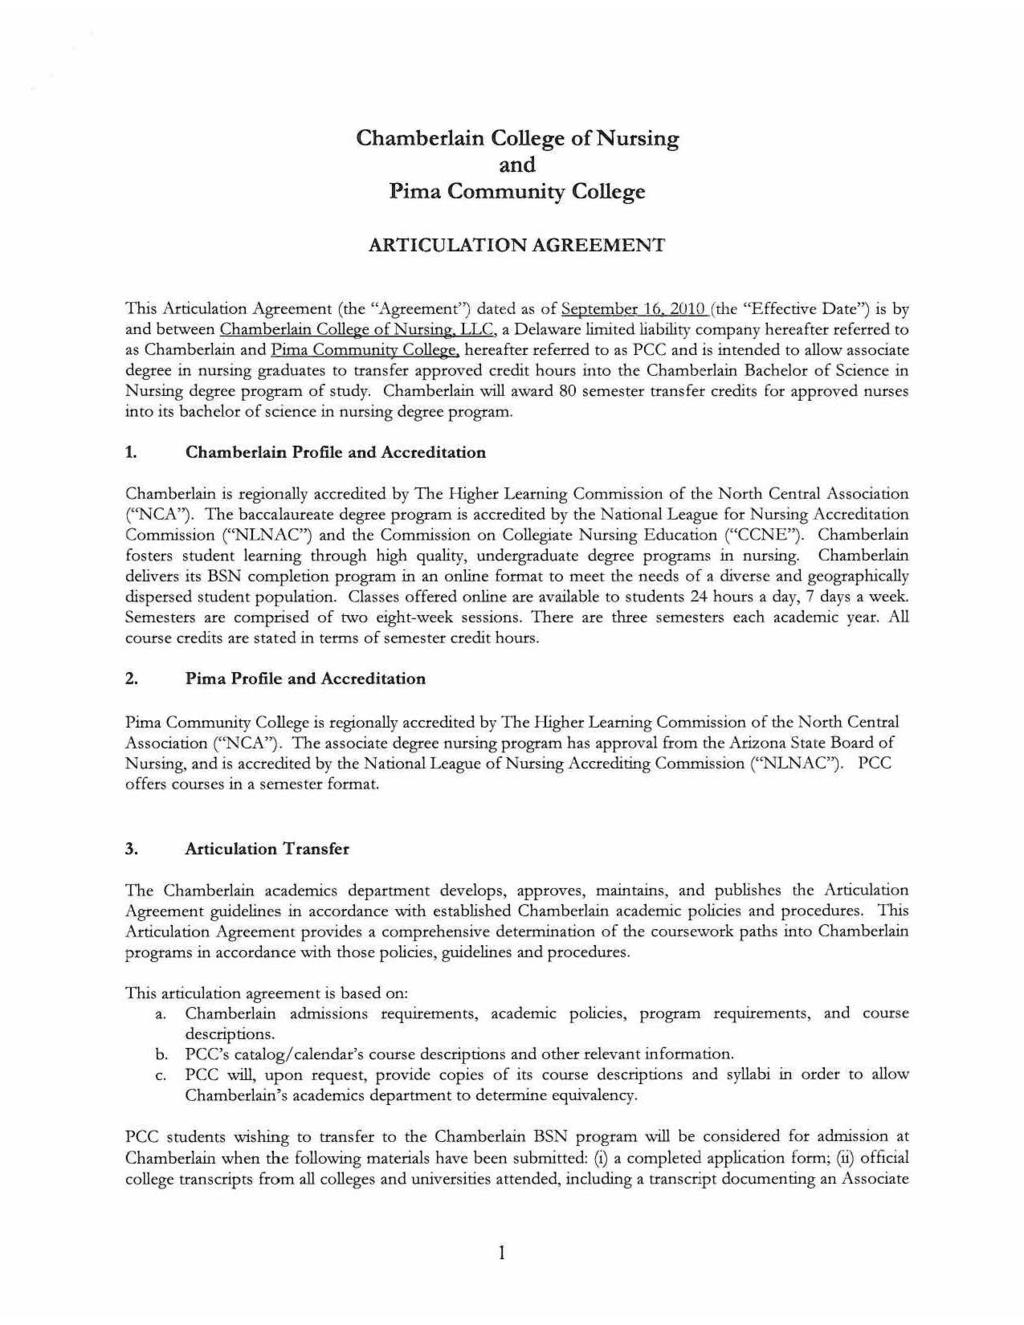 Chamberlain College of Nursing and Pima Community College ARTICULATION AGREEMENT This Articulation Agreement (the "Agreement") dated as of September 16.